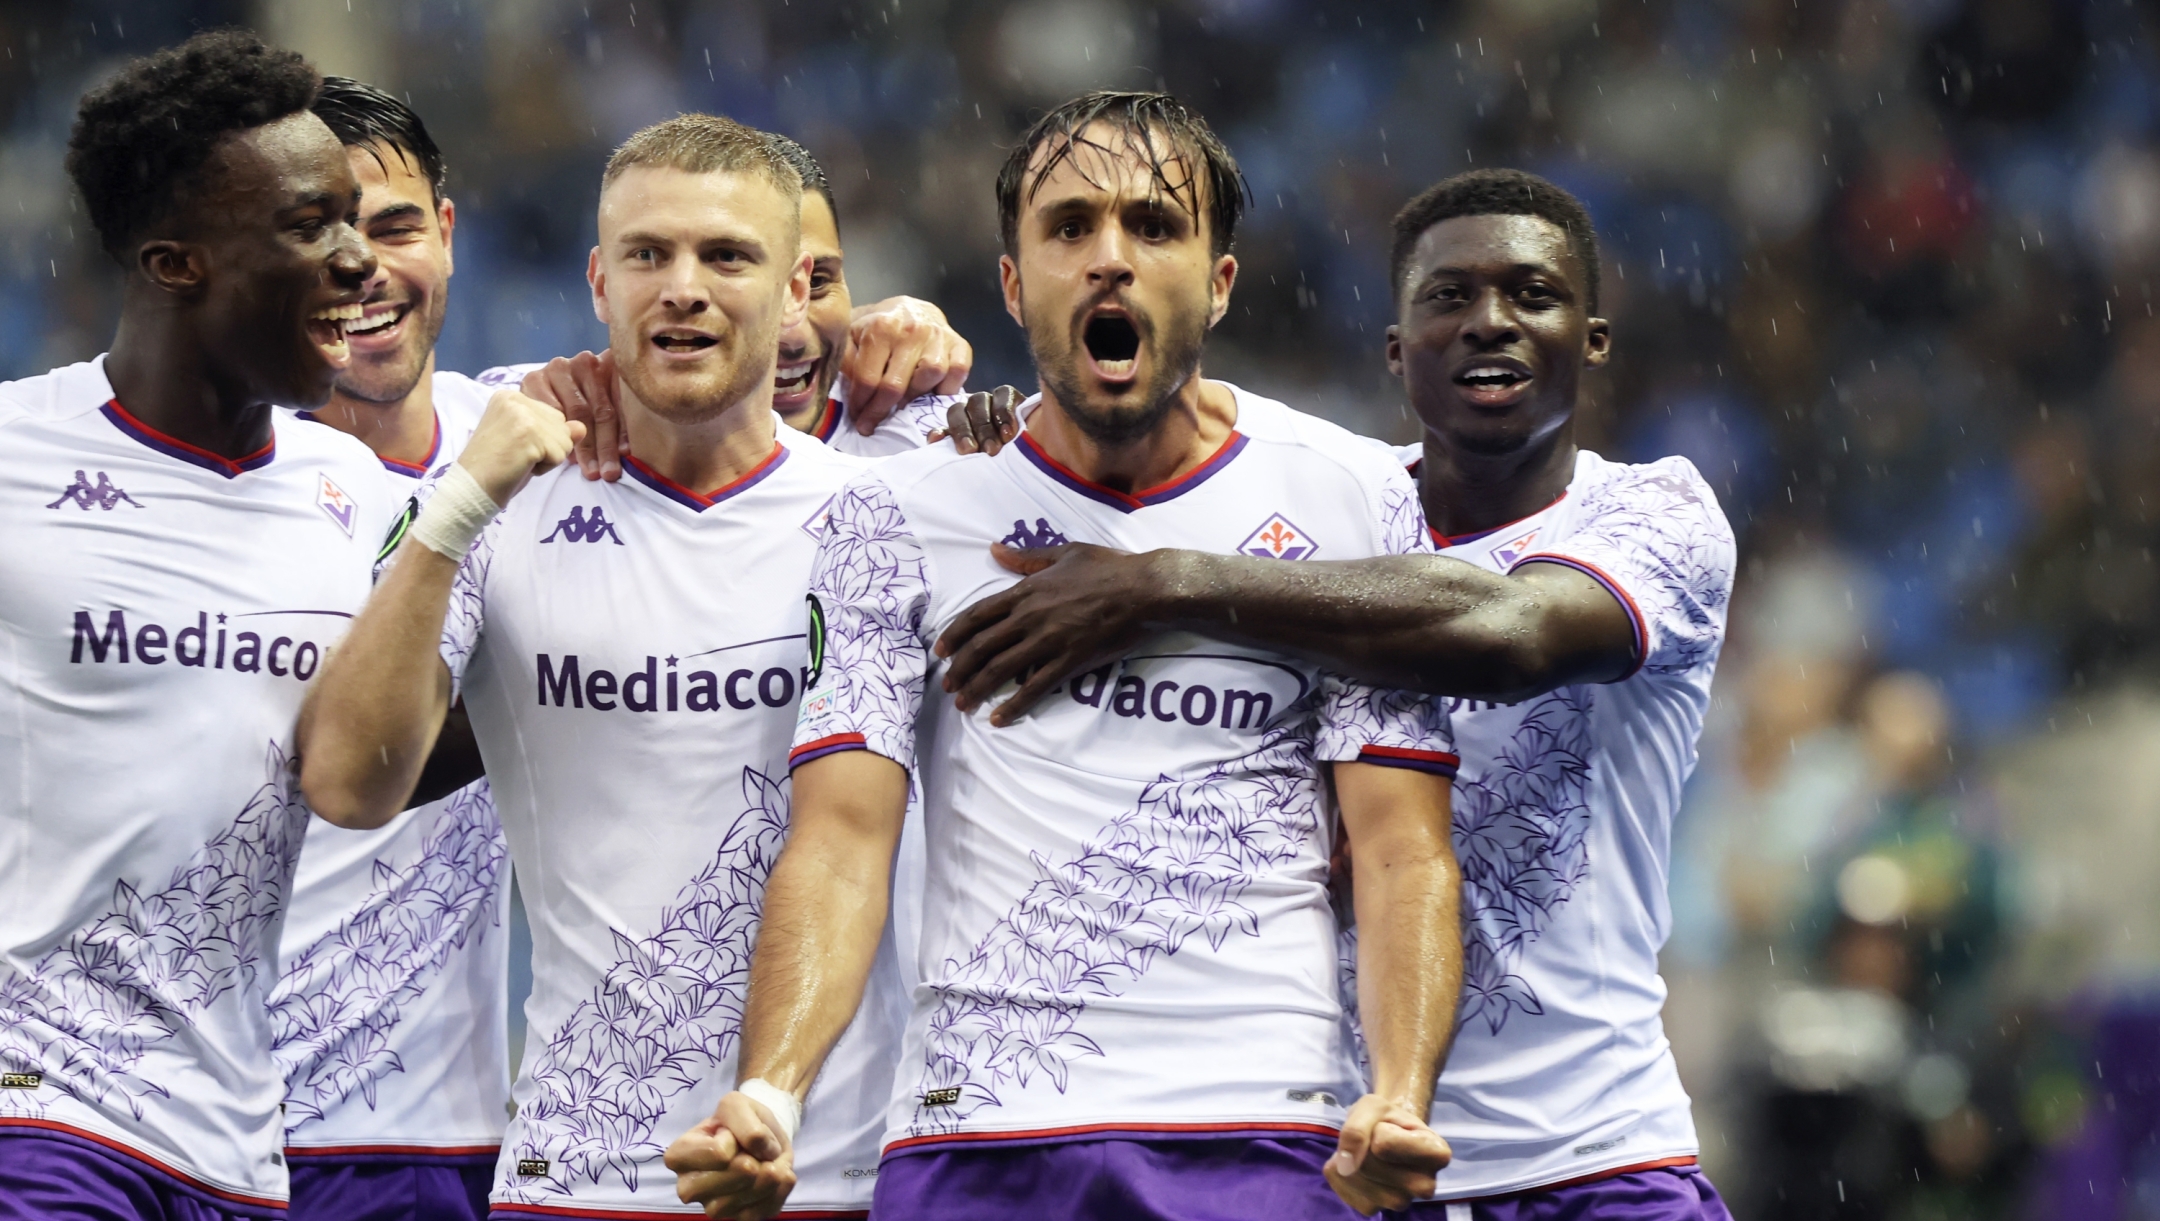 Fiorentina's Luca Ranieri, second right, celebrates after scoring the opening goal during the Europa Conference League Group F soccer match between KRC Genk and AFC Fiorentina at the Genk Arena in Genk, Belgium, Thursday, Sept. 21, 2023. (AP Photo/Francois Walschaerts)